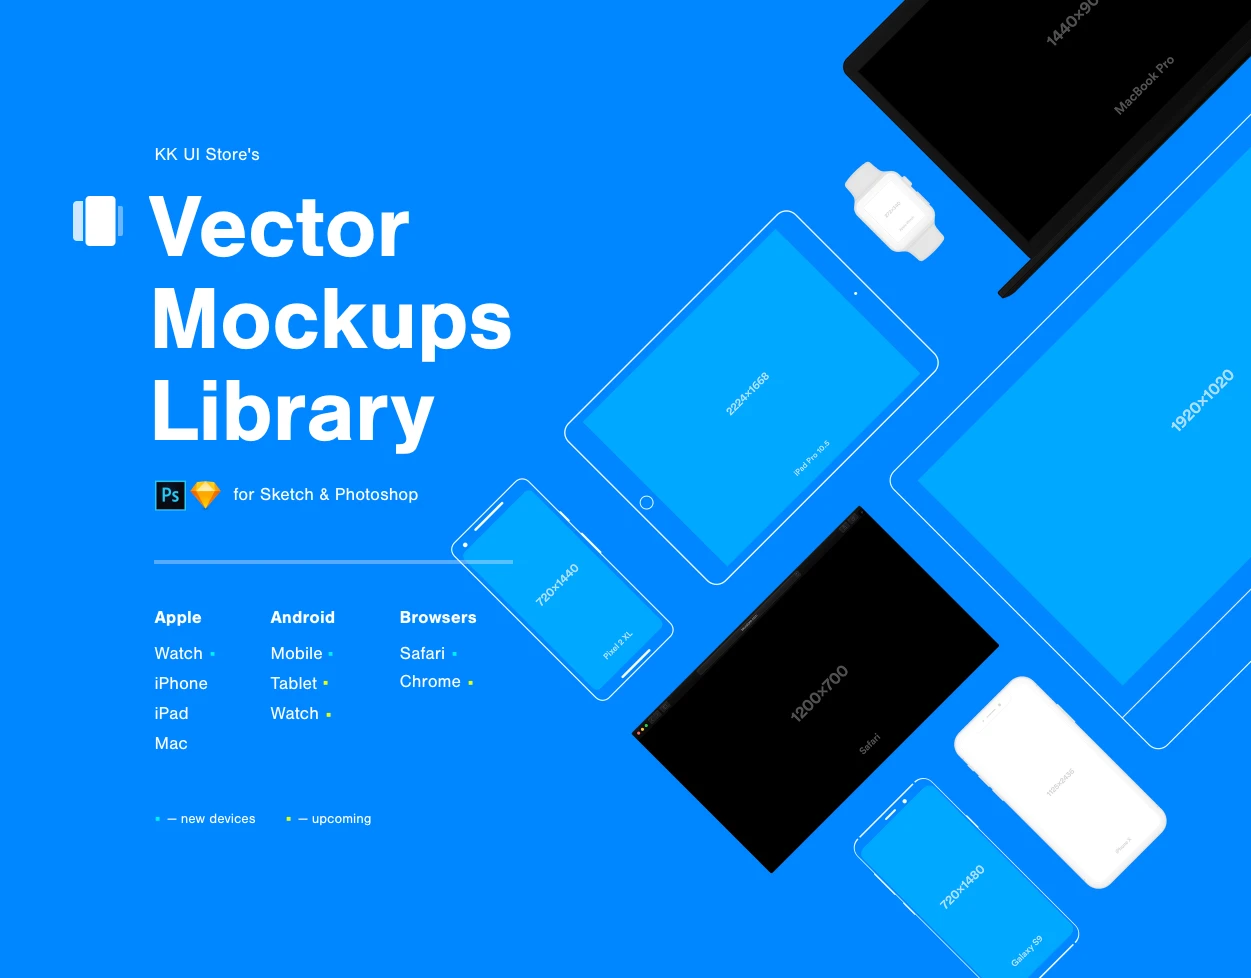 Vector Mockups Library - Huge collection of presentations mockups. This library consits of popular devices.